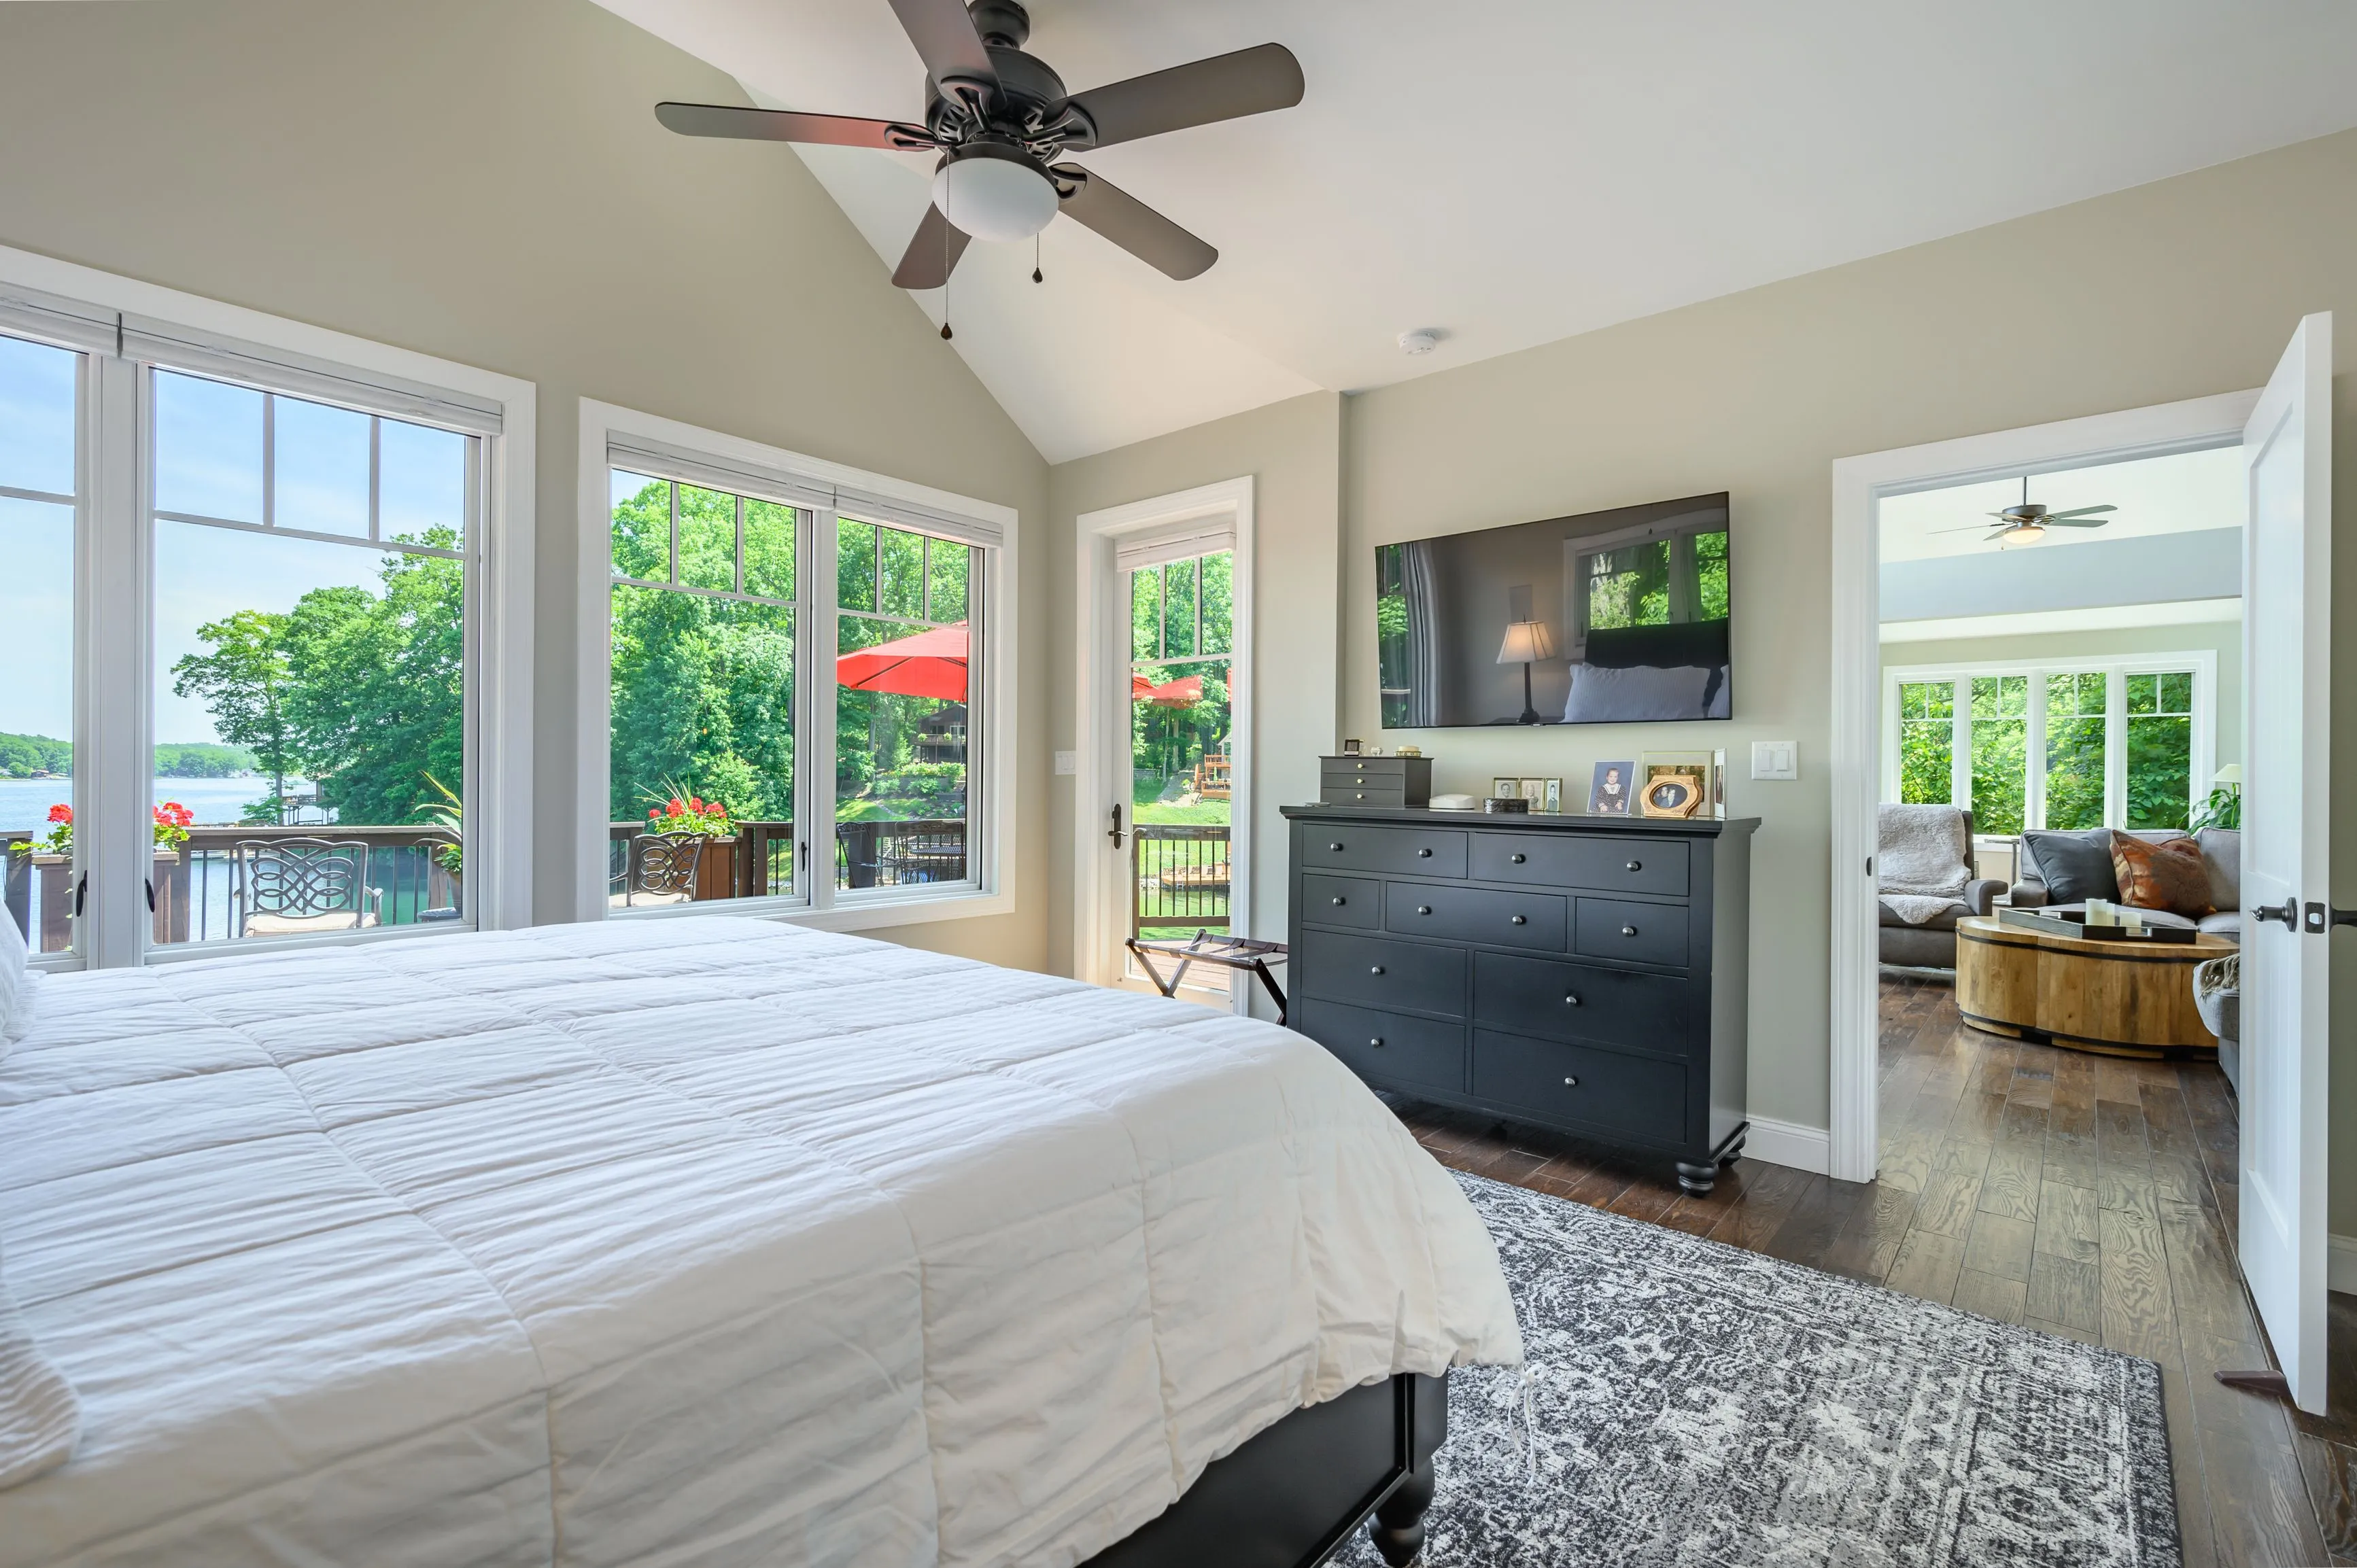 Bright and airy bedroom with a large bed, ceiling fan, and open French doors leading to a balcony.